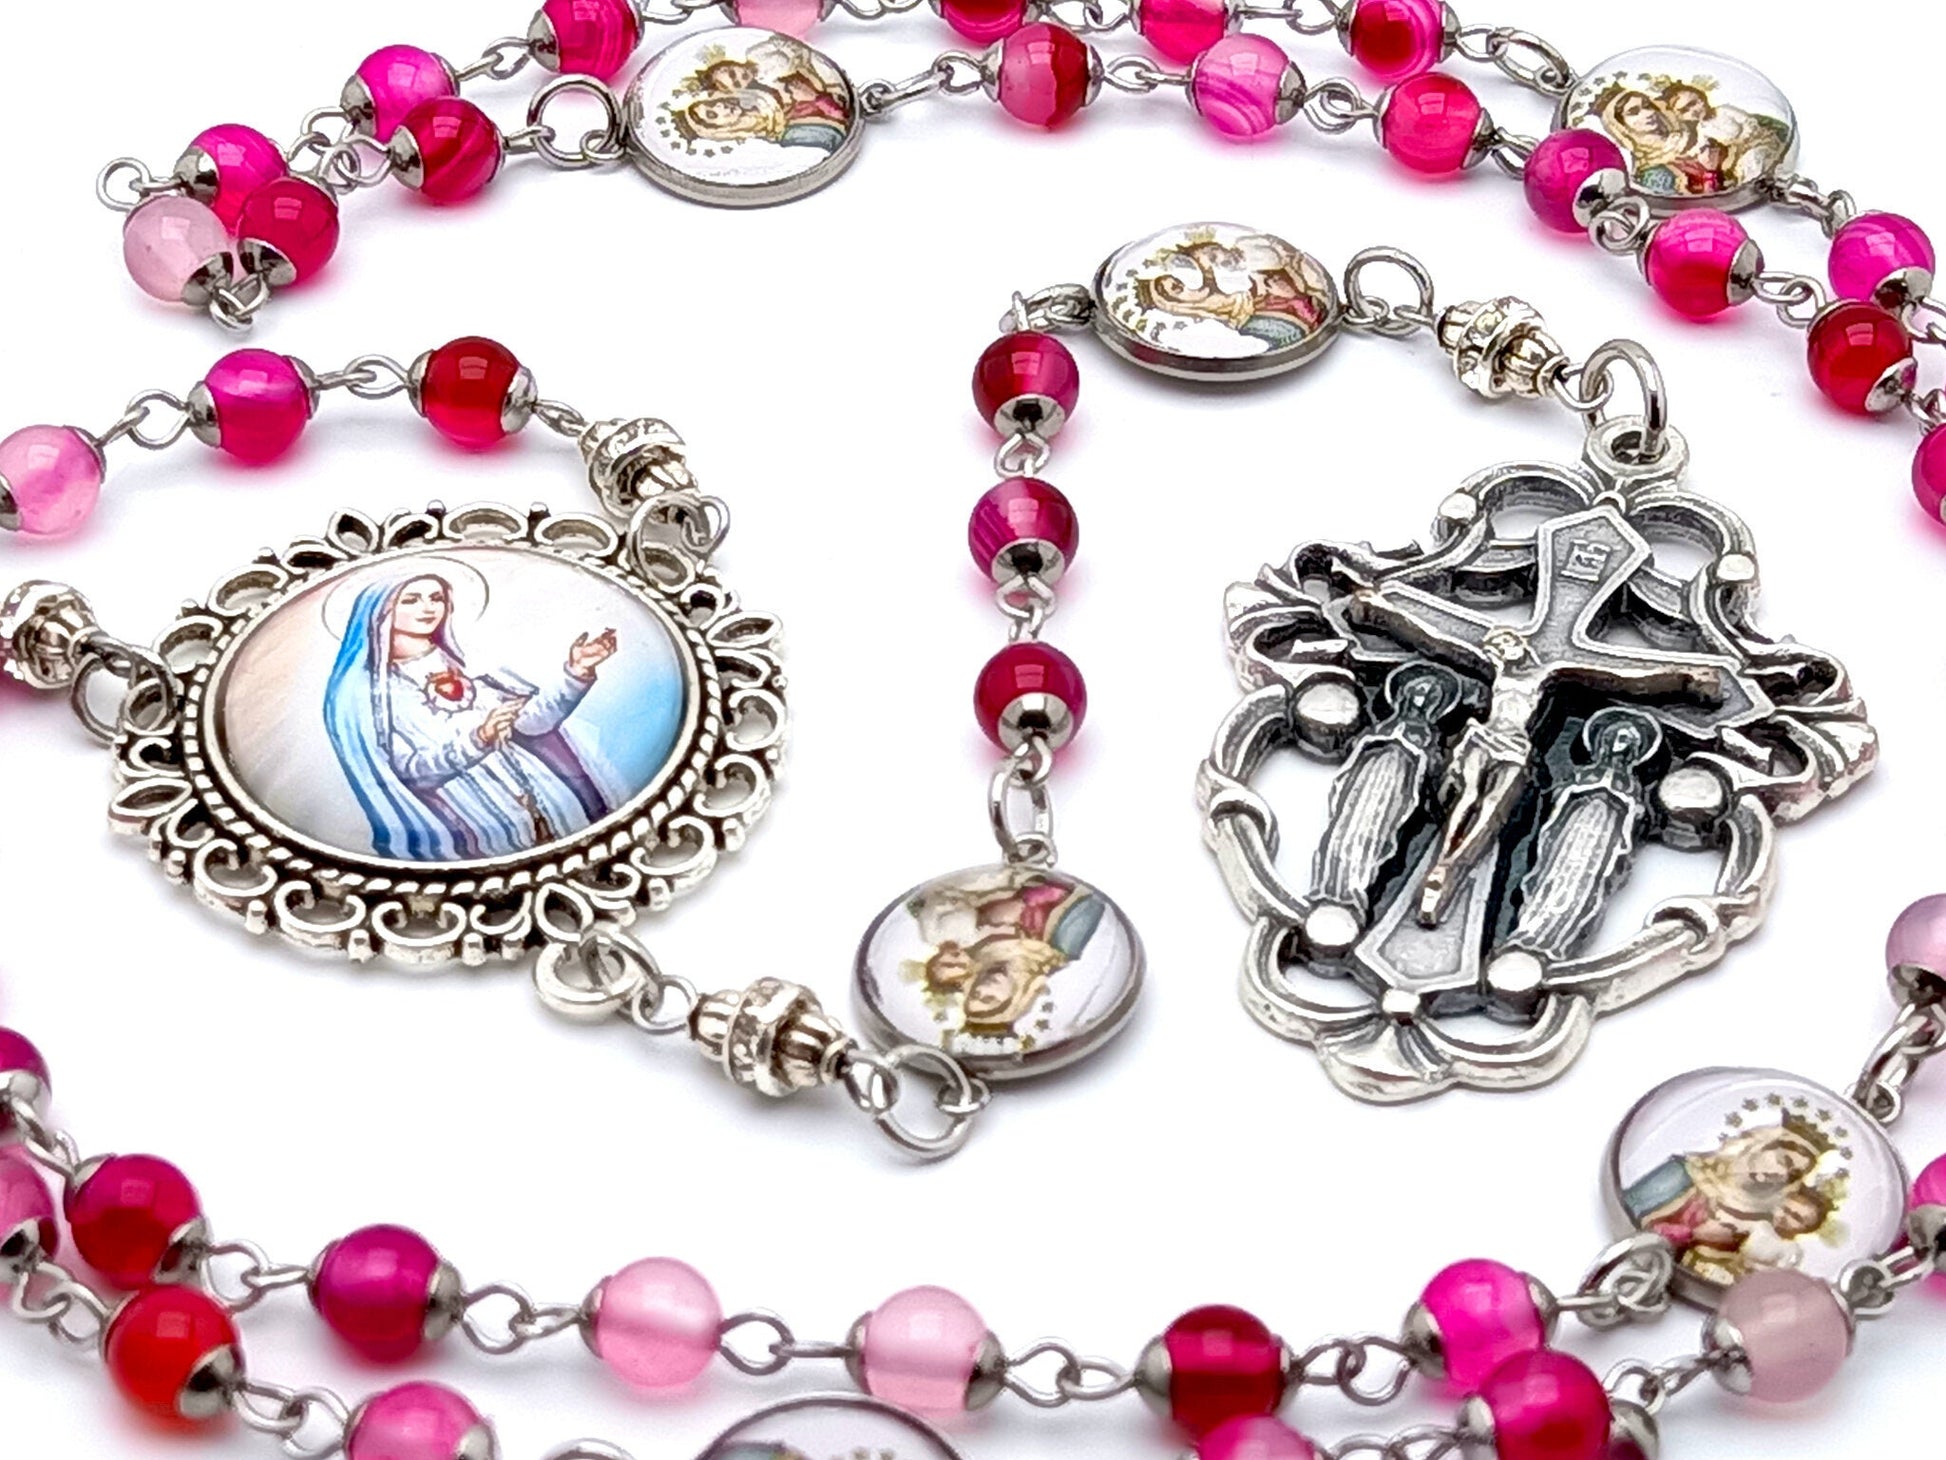 Immaculate Heart of Mary unique rosary beads with pink agate gemstone and picture medal beads, holy angel crucifix and picture centre medal.